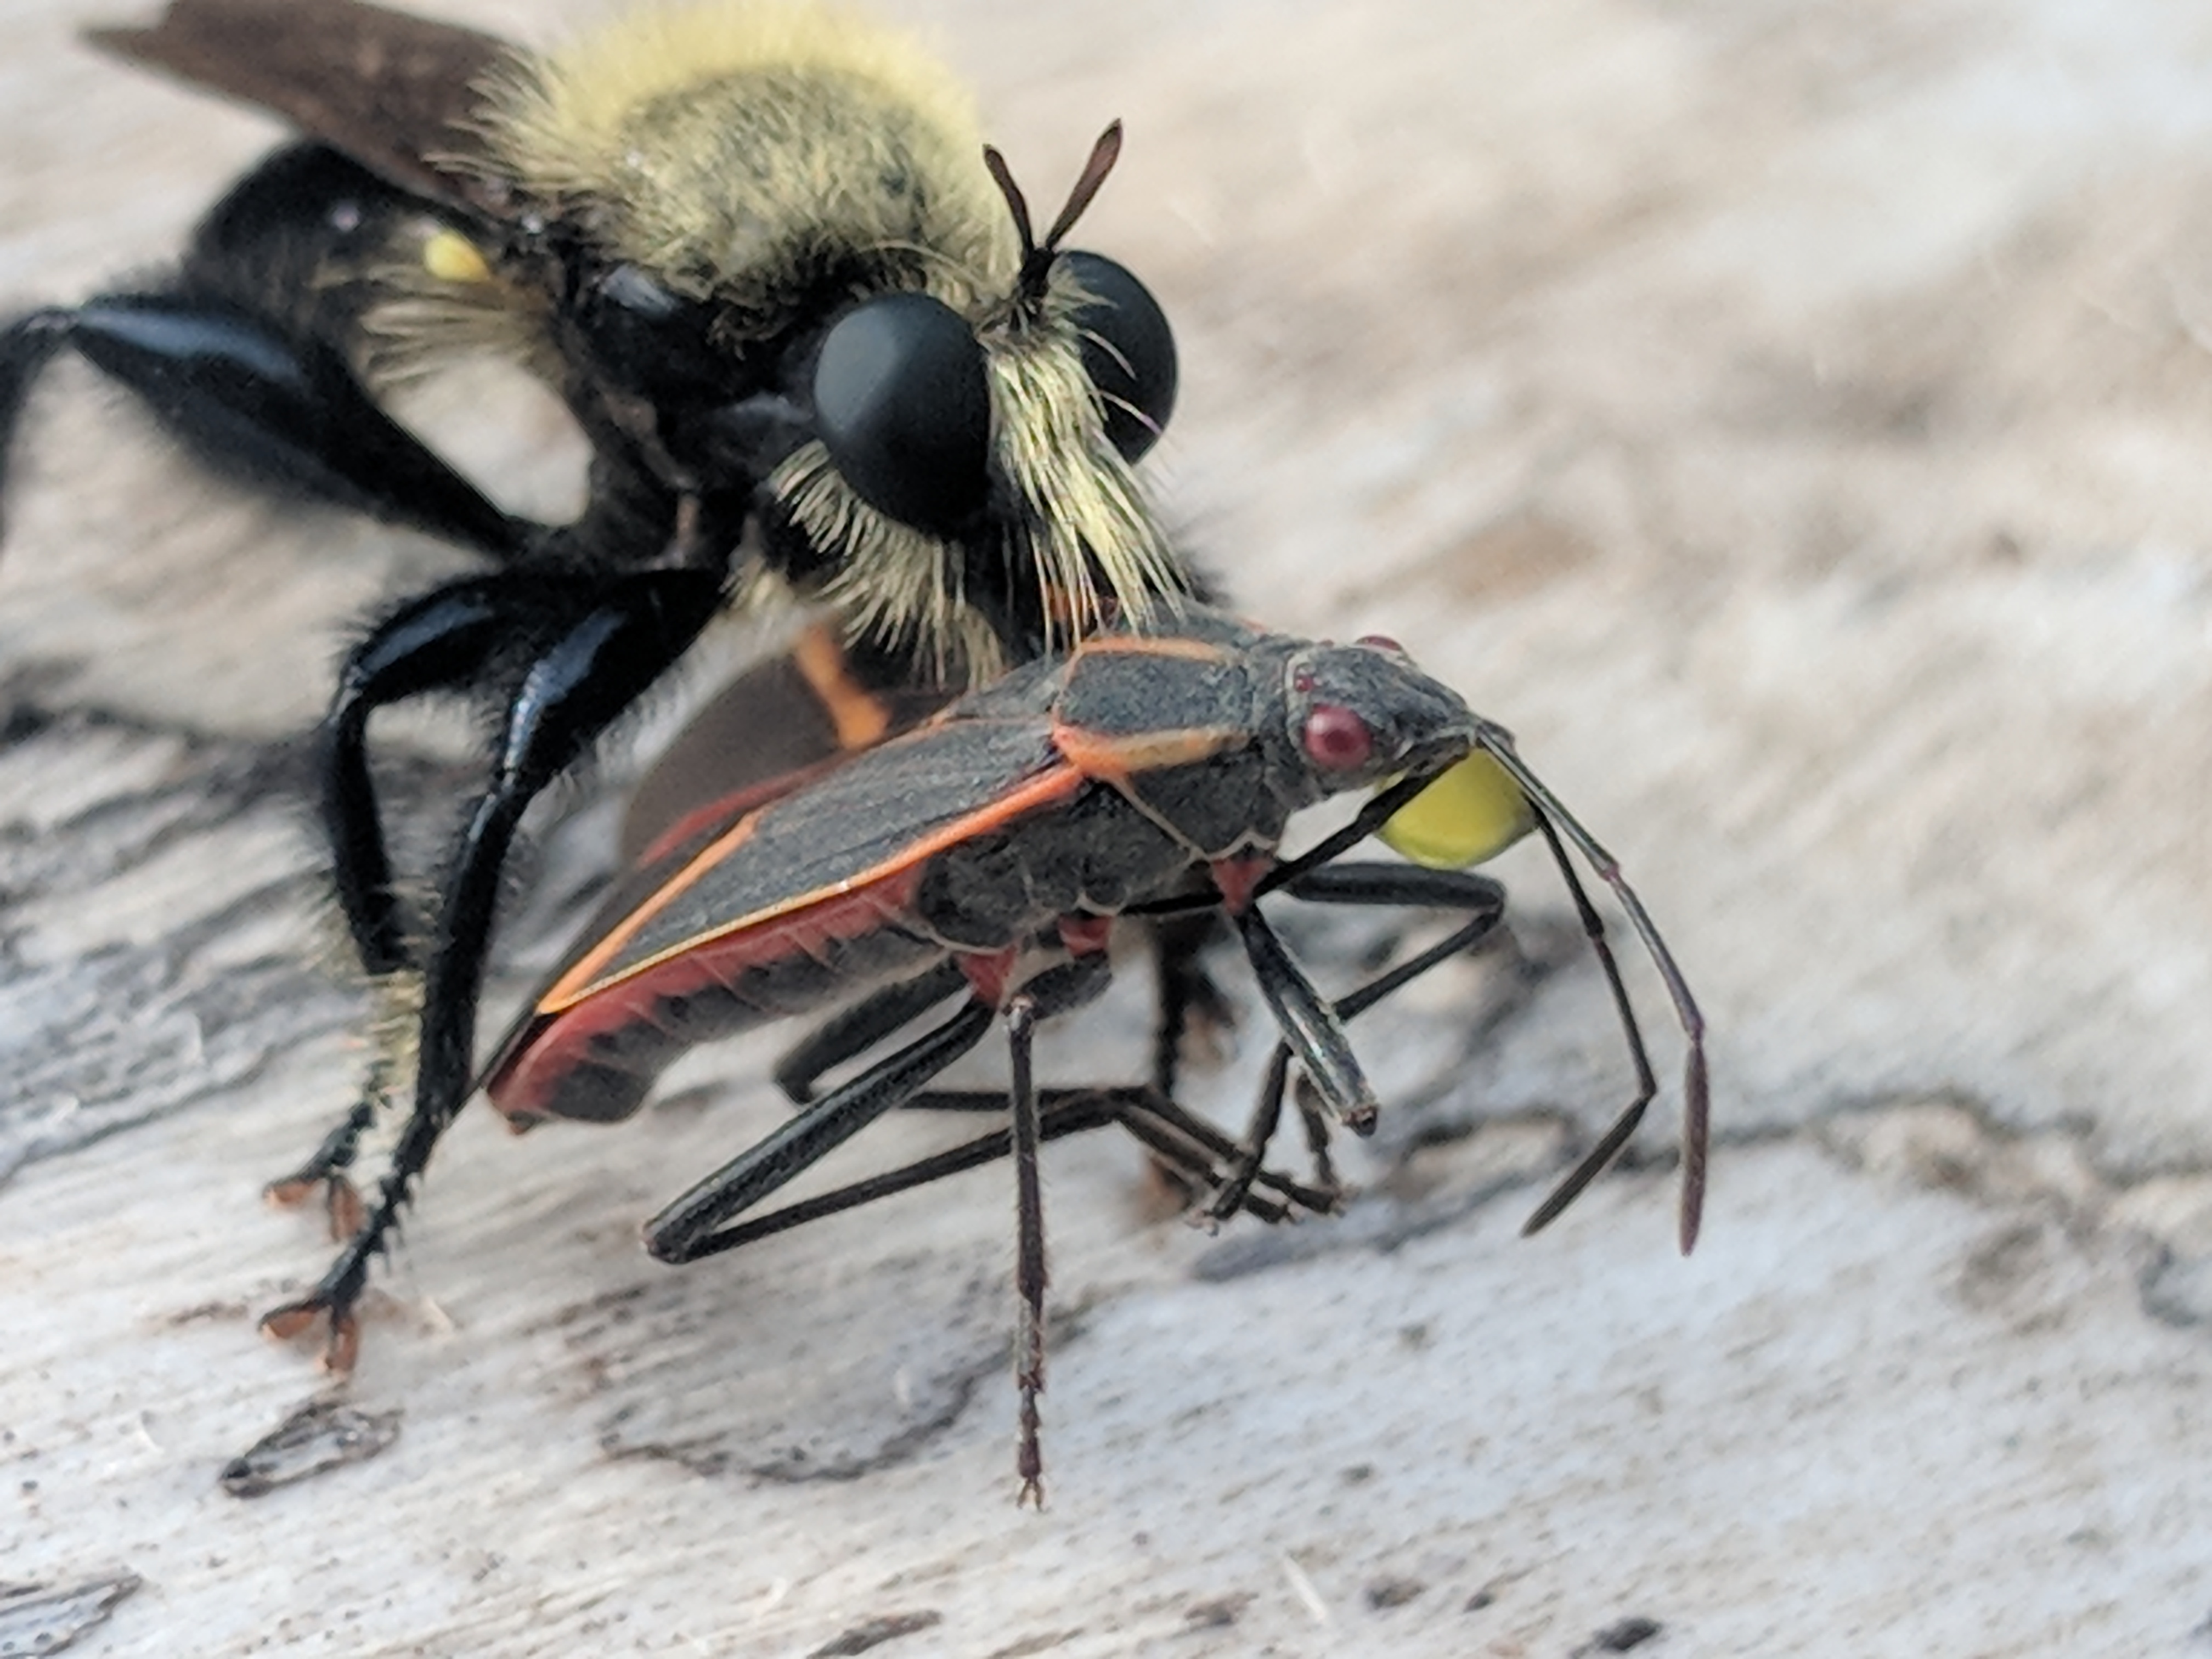 Boxelder bug reaches the end of the line, courtesy of a giant, hairy, black-eyed beast. The robber fly scores a tasty, fragrant dinner.